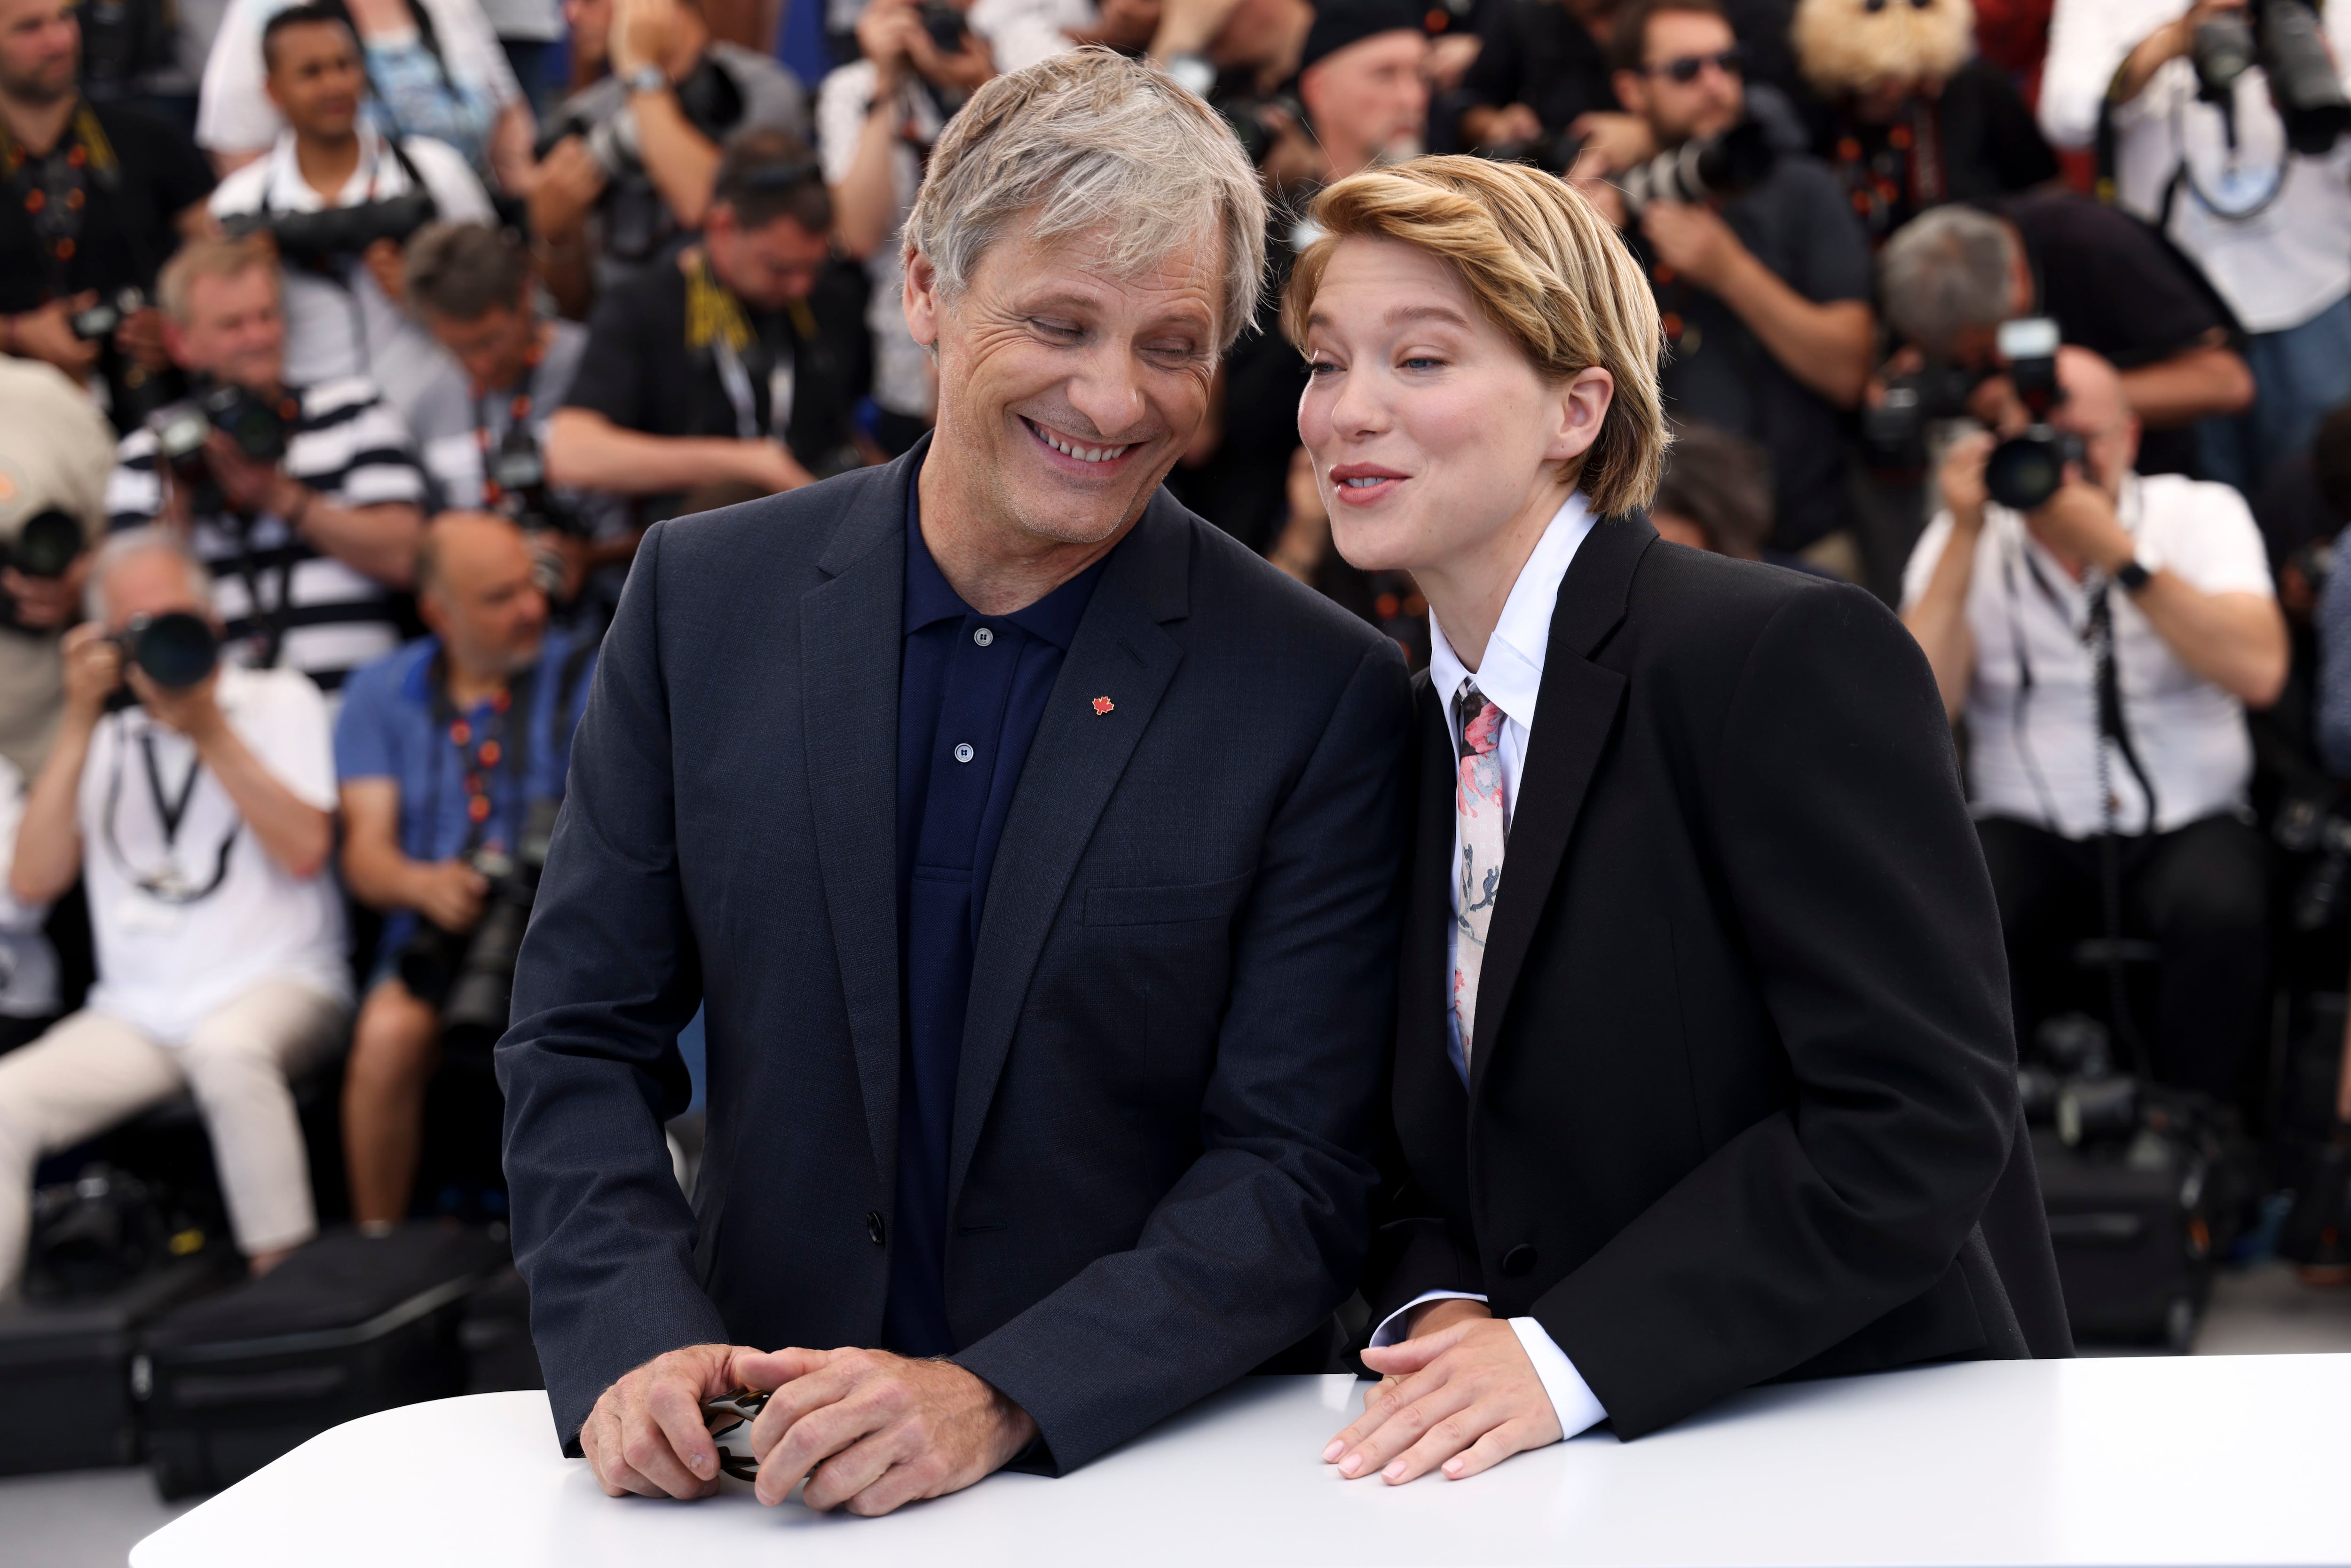 Getting Ready for the Cannes Film Festival with Léa Seydoux